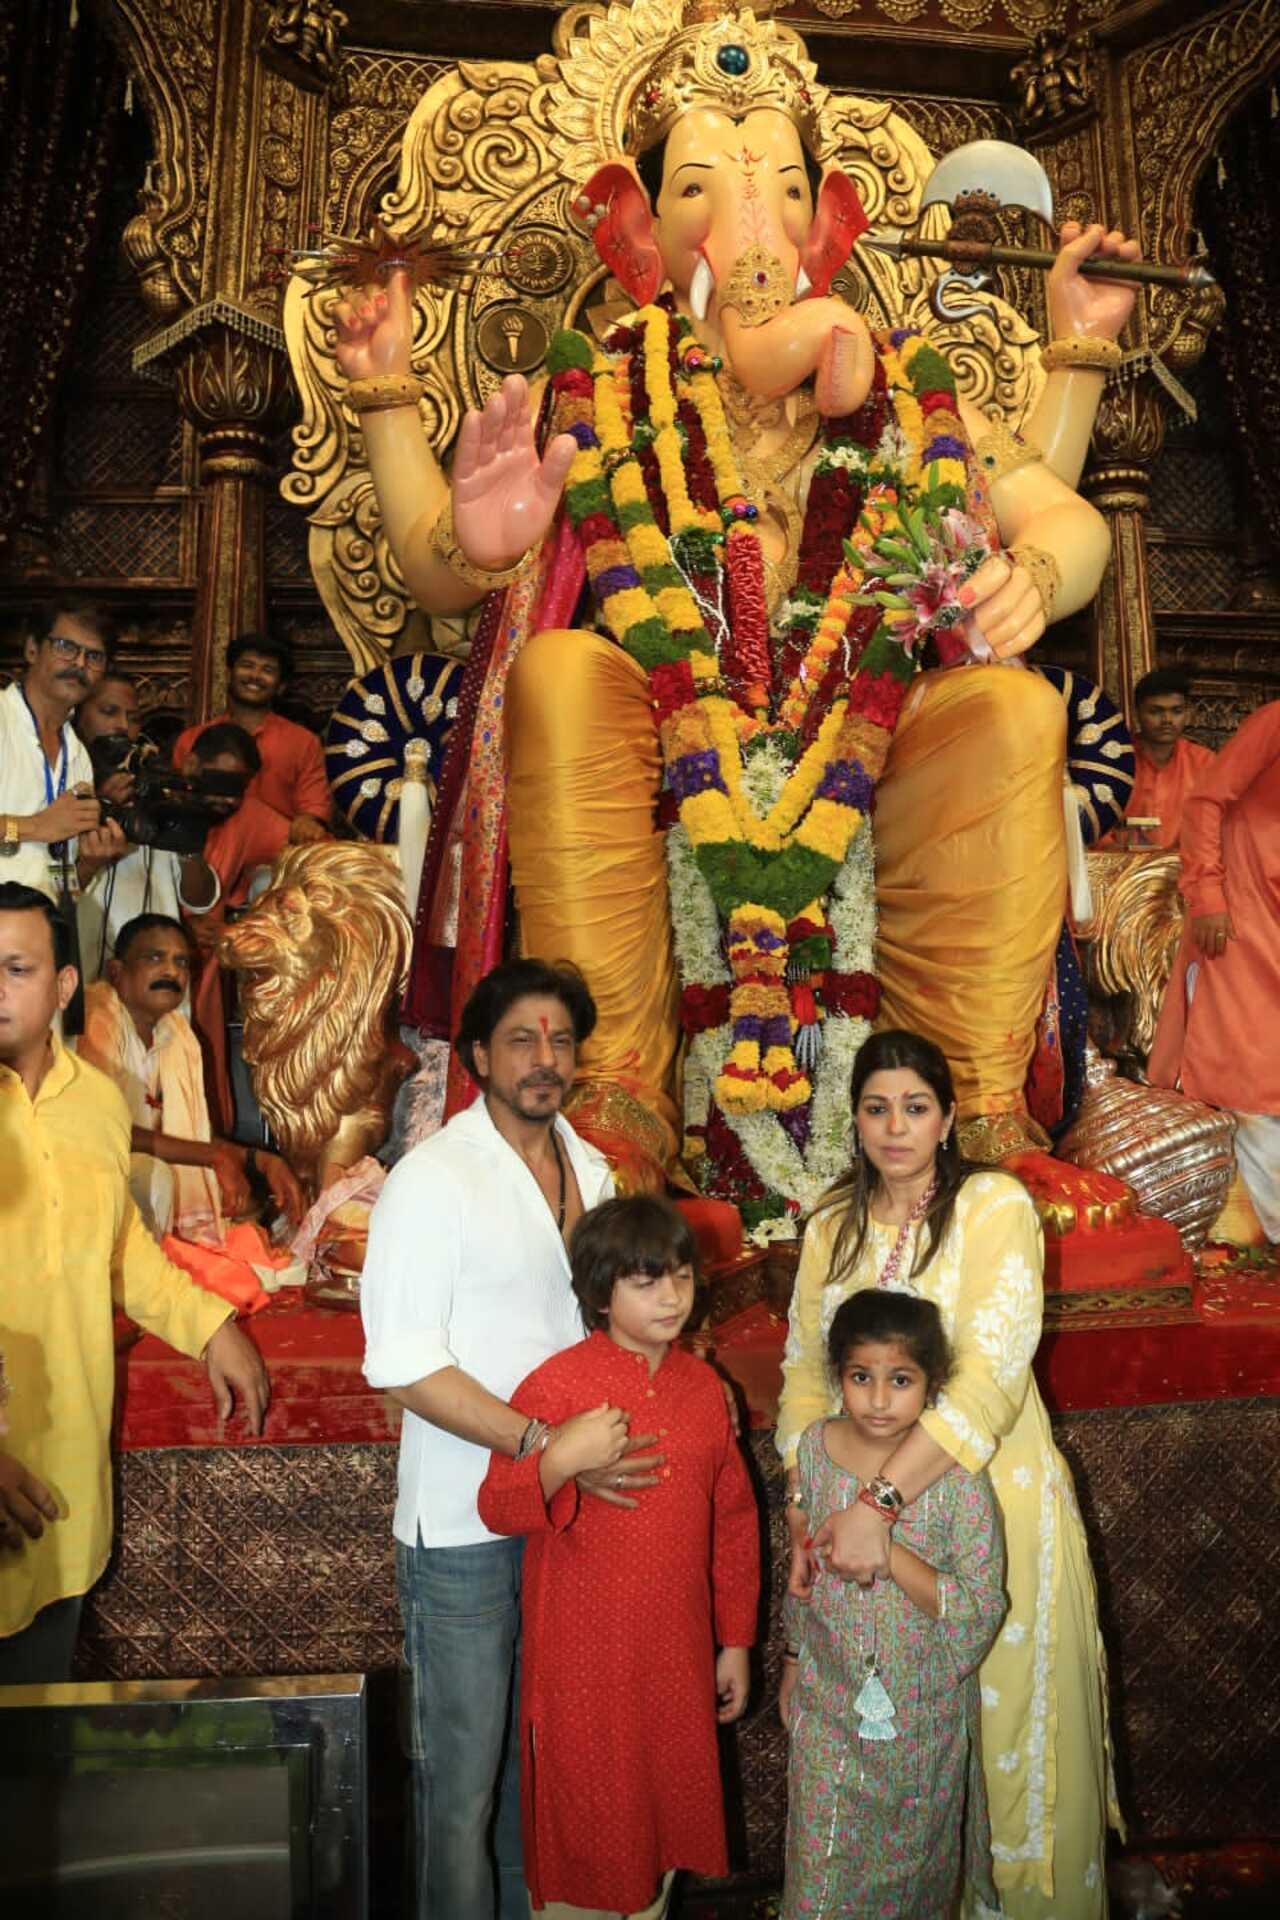 Shah Rukh Khan visited Lalbaugcha Raja with his younger son AbRam Khan and manager Pooja Dadlani